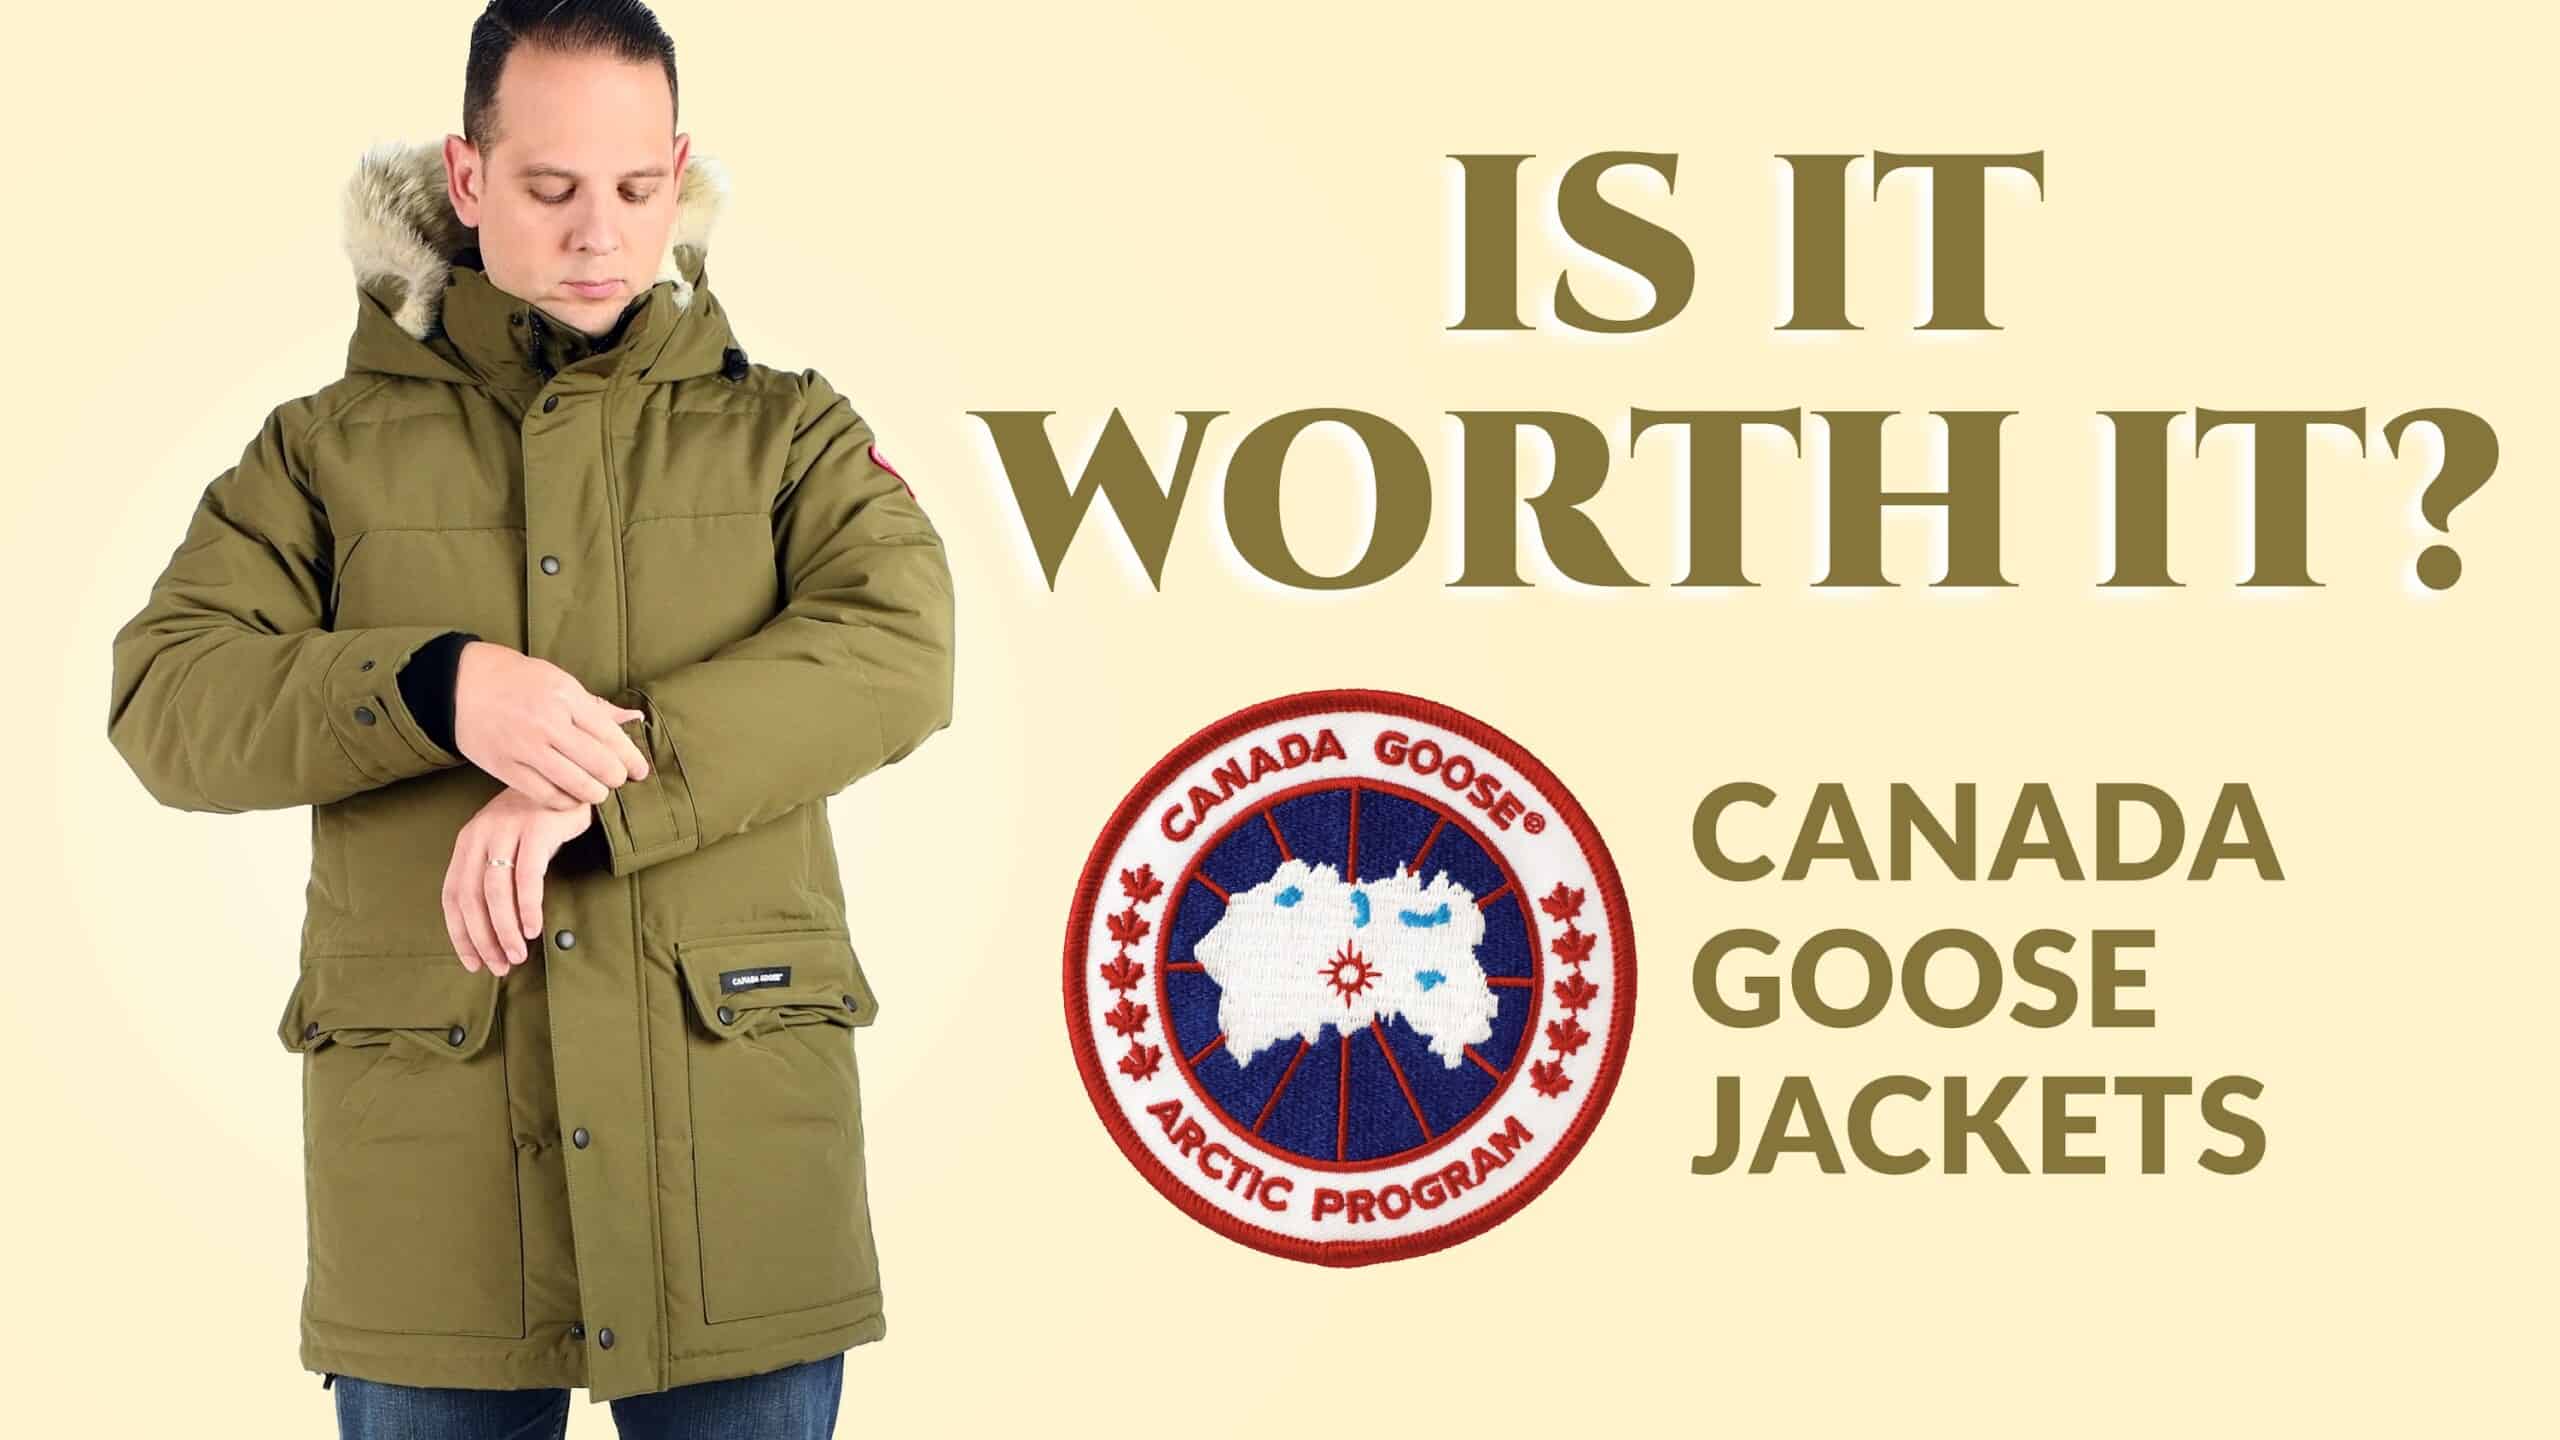 Canada Goose Jackets - Is It Worth It?